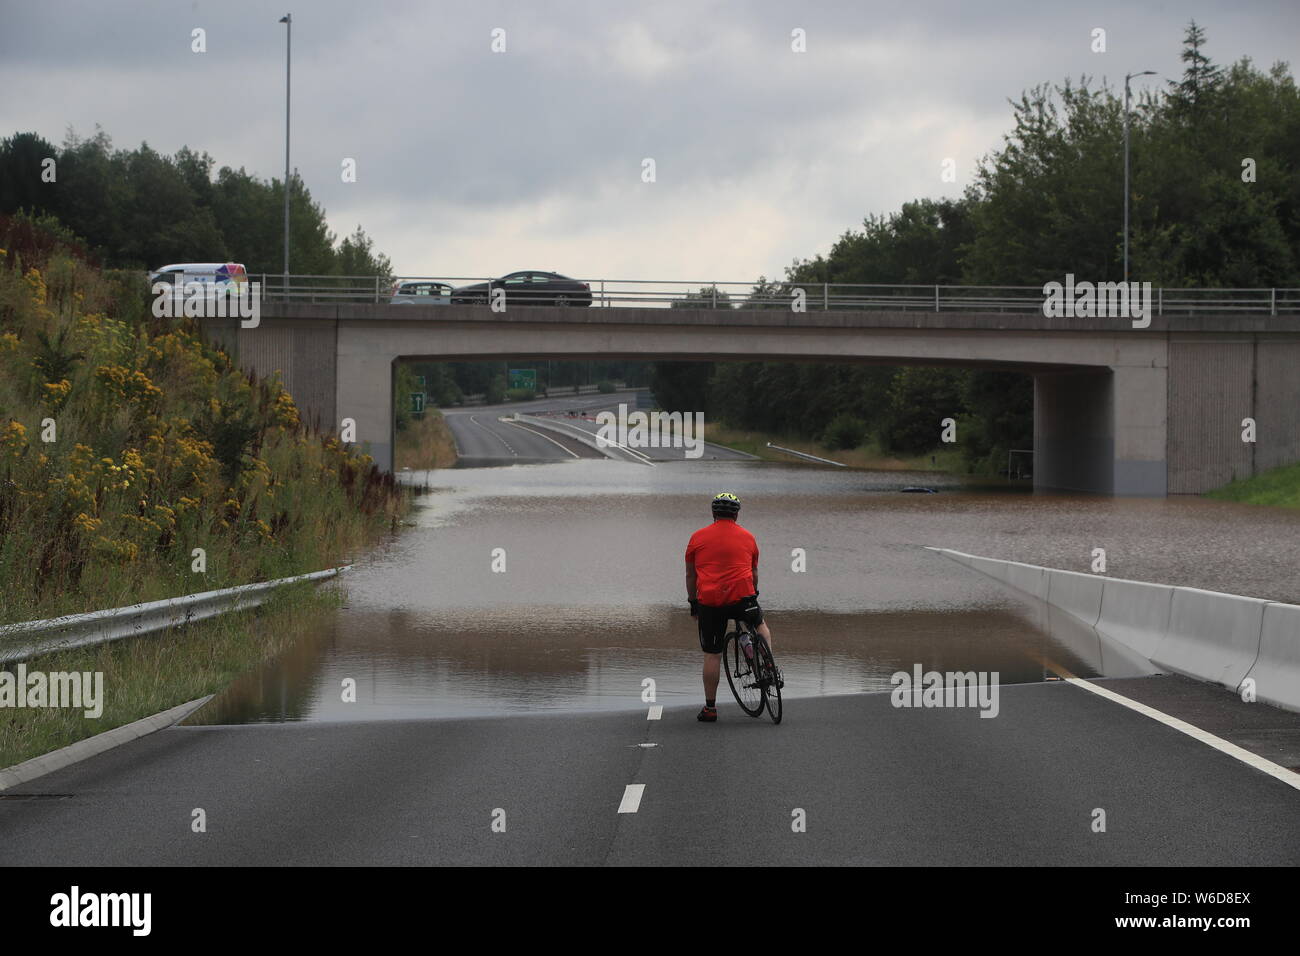 A bike rider comes to a halt as flood water blocks a road on the A555 near Handforth, Cheshire, where a major incident was declared late on Wednesday after heavy rainfall caused severe flooding. Stock Photo